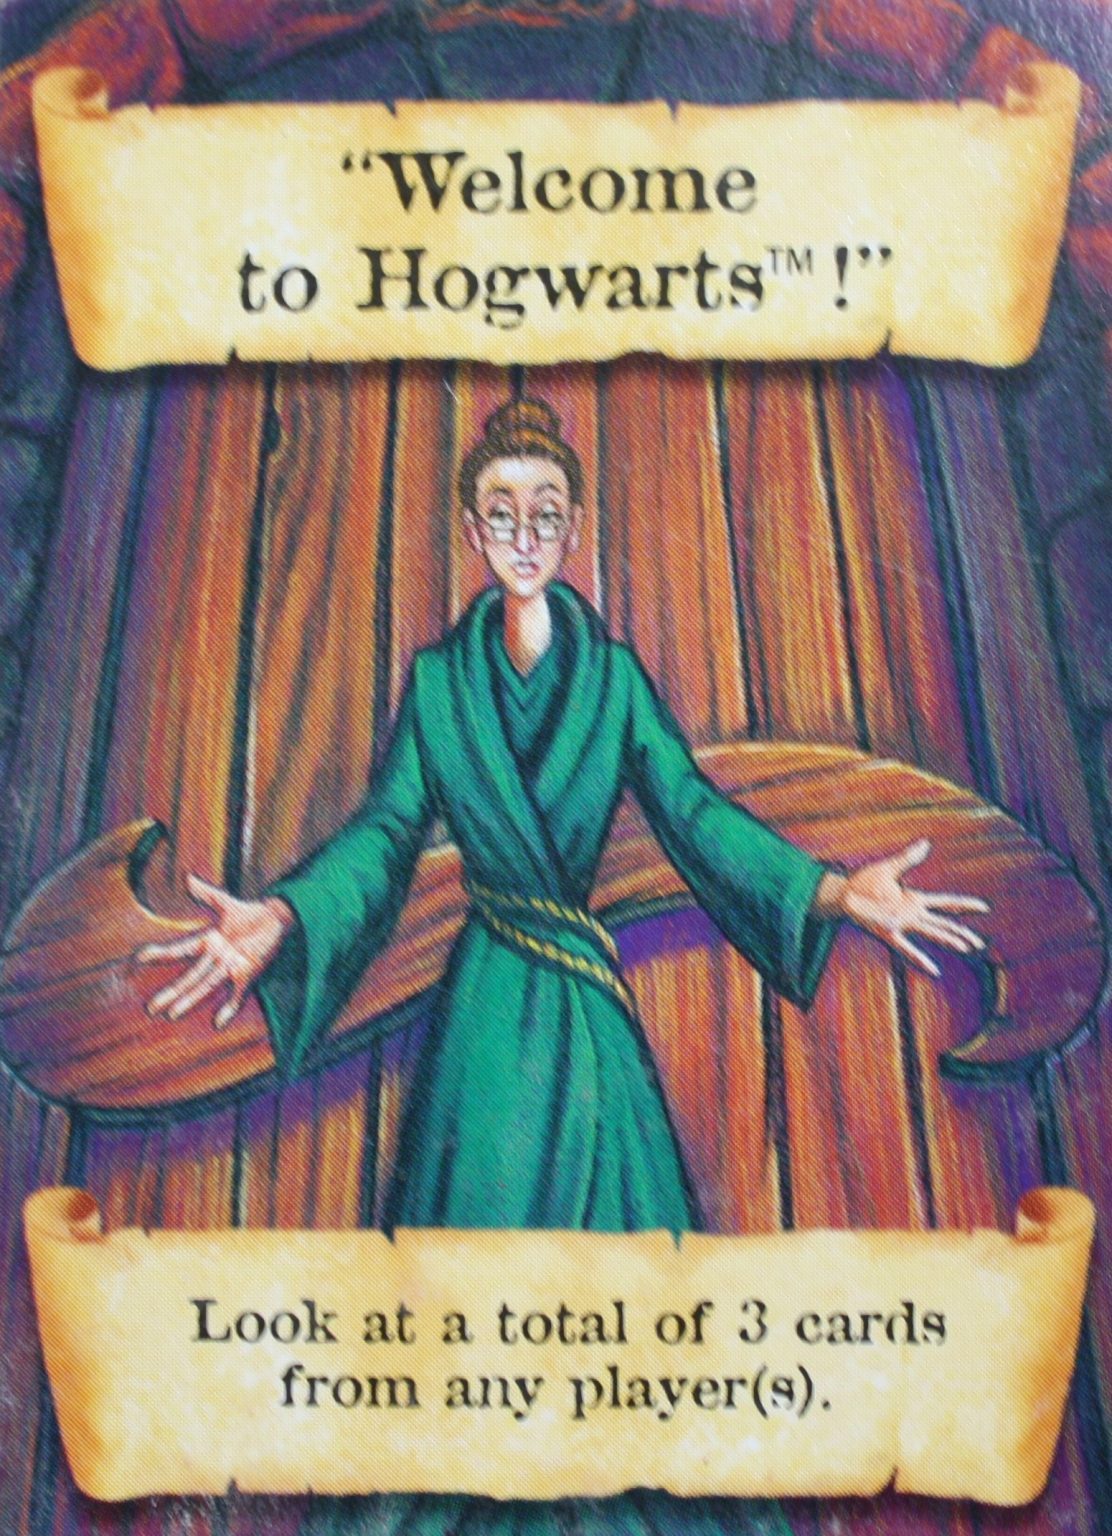 parts-only-harry-potter-mystery-at-hogwarts-board-game-9-card-only-team-toyboxes